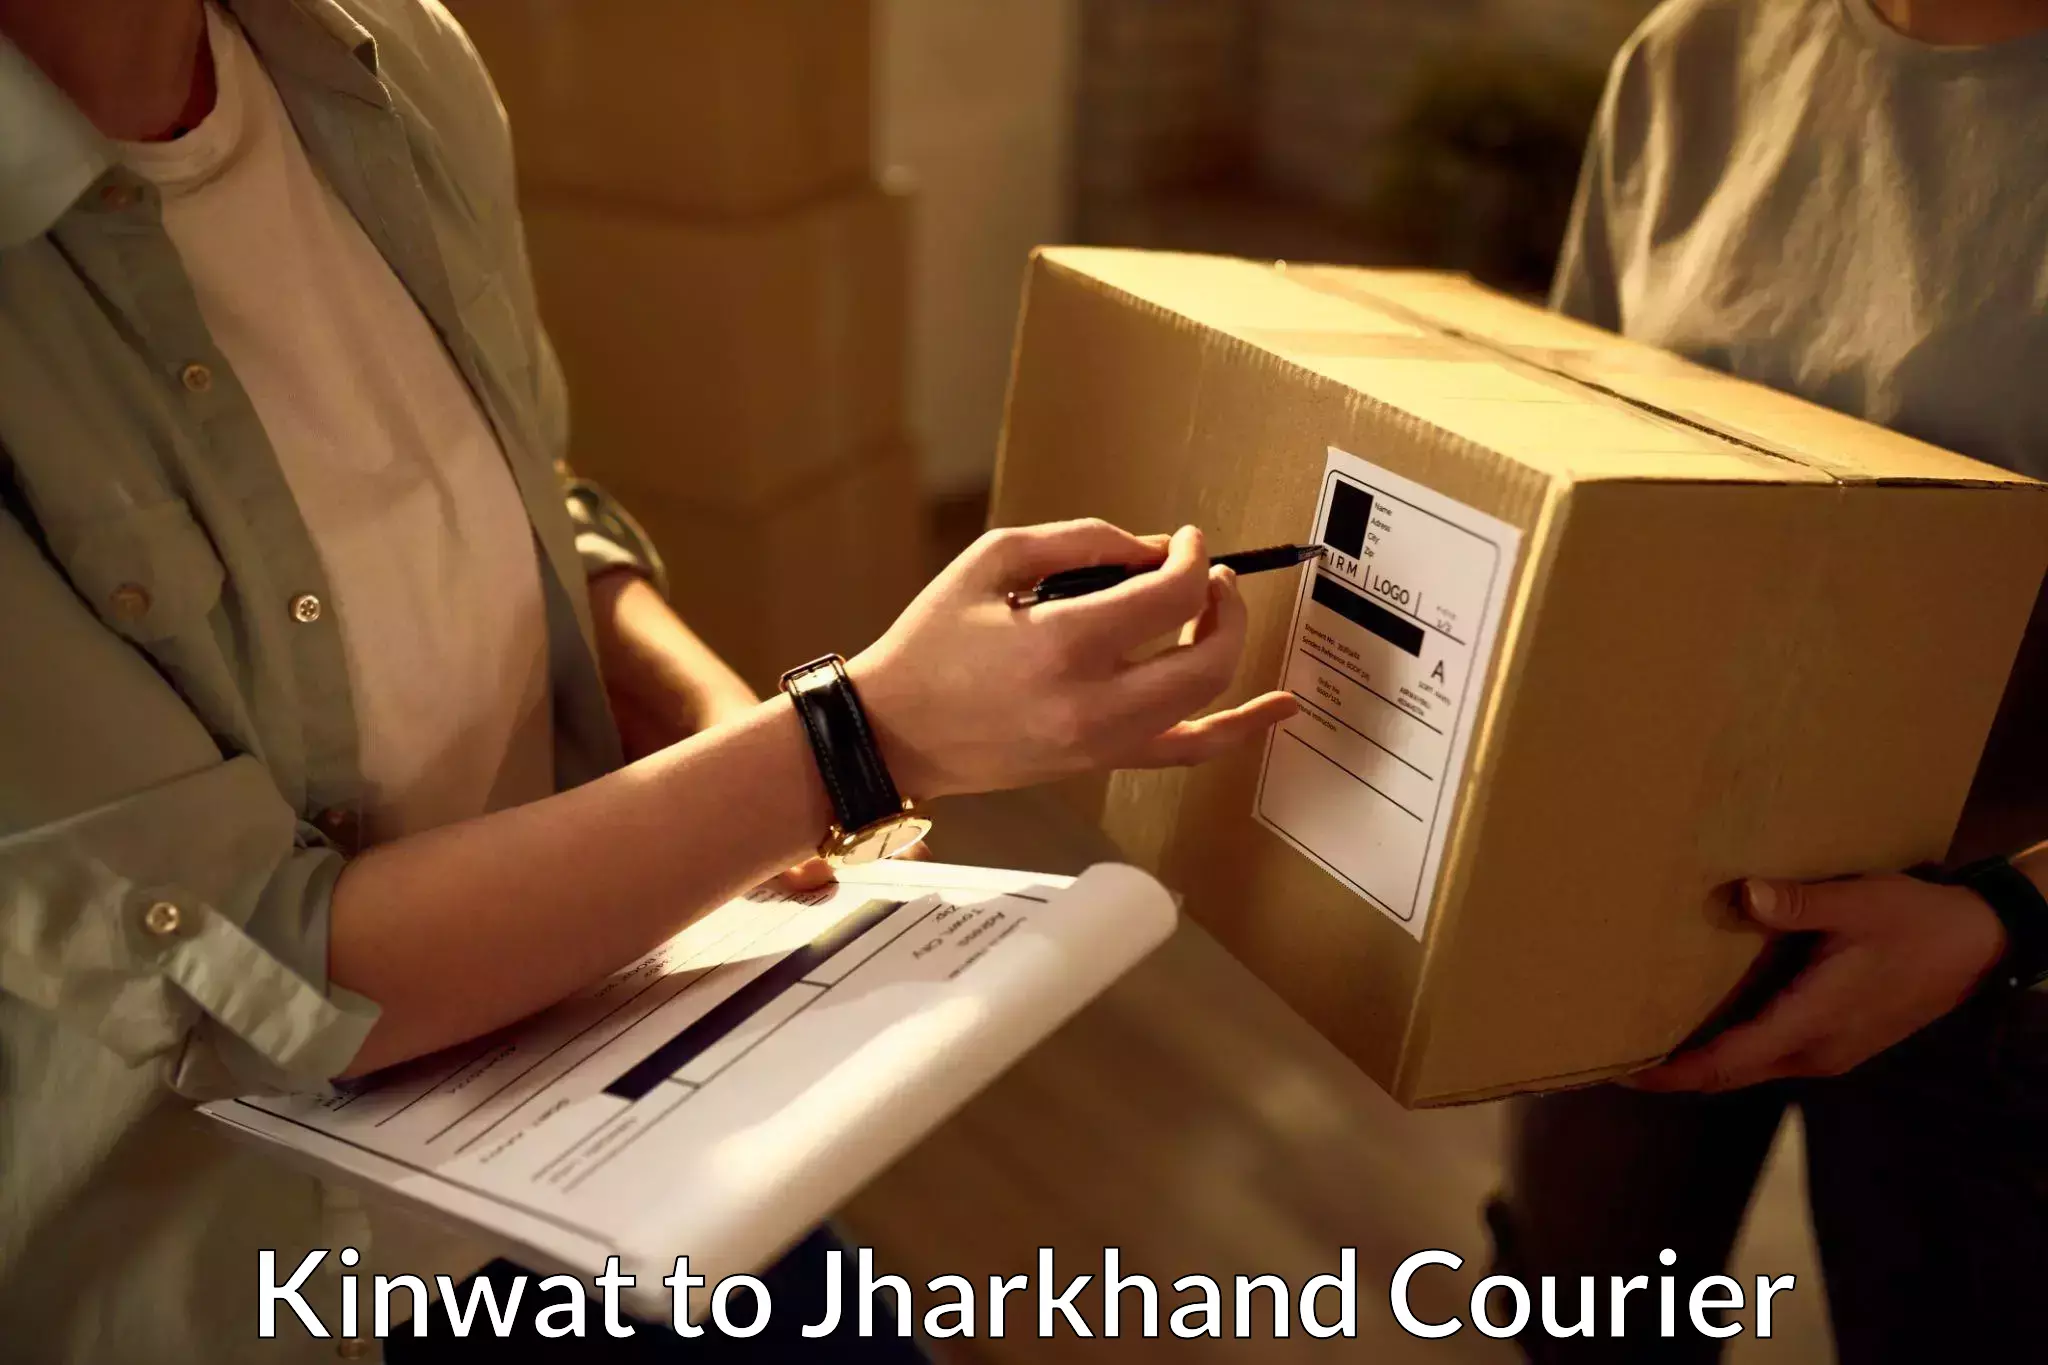 Local delivery service Kinwat to Jharkhand